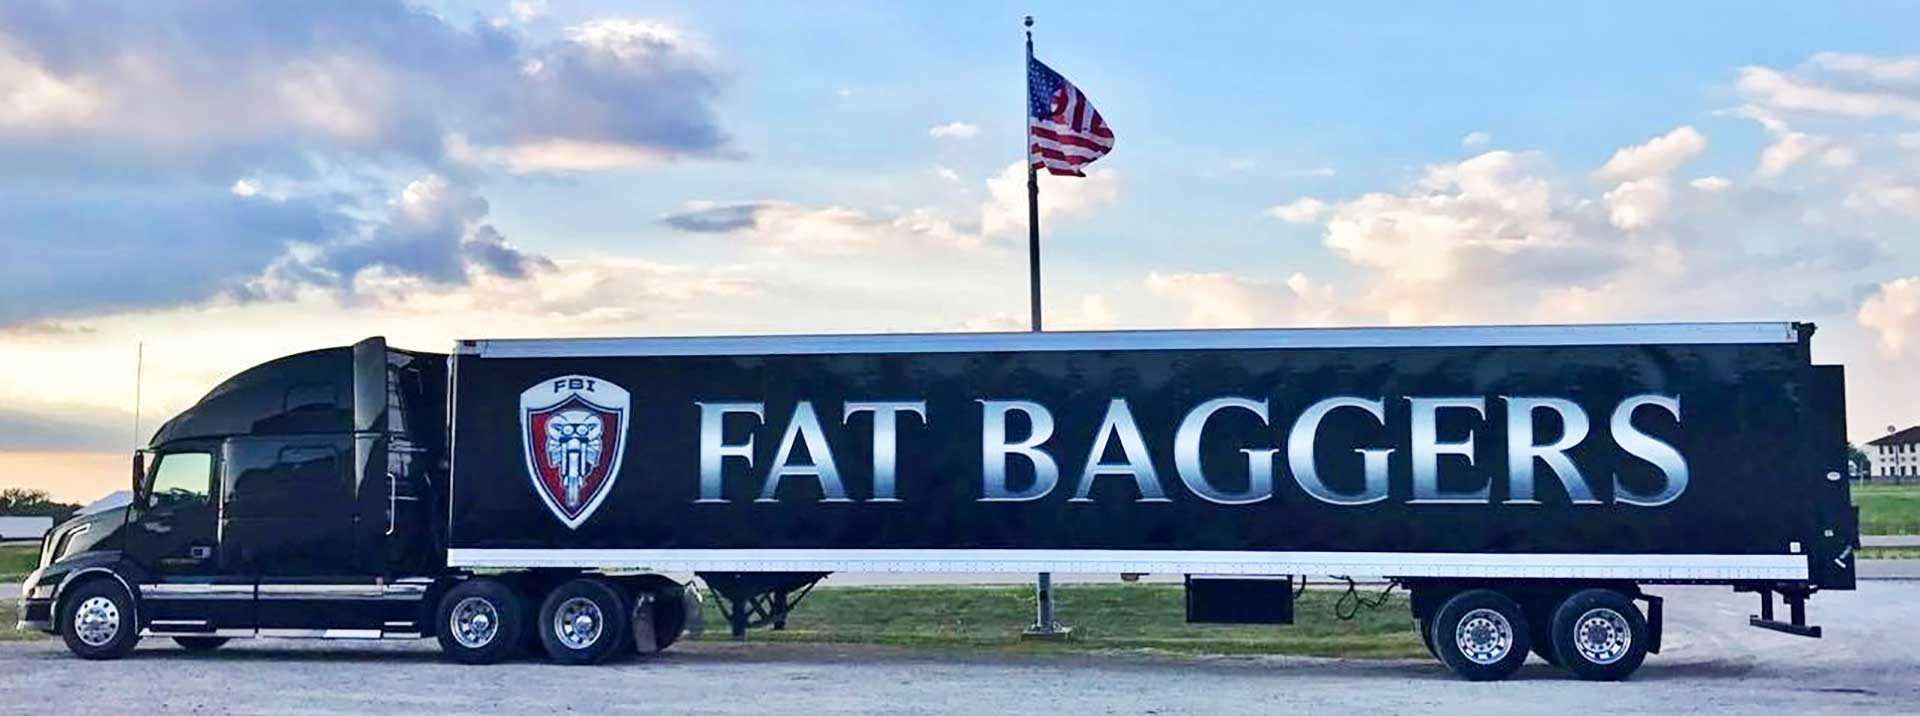 Logo and shipping truck for Fat Baggers, Inc.